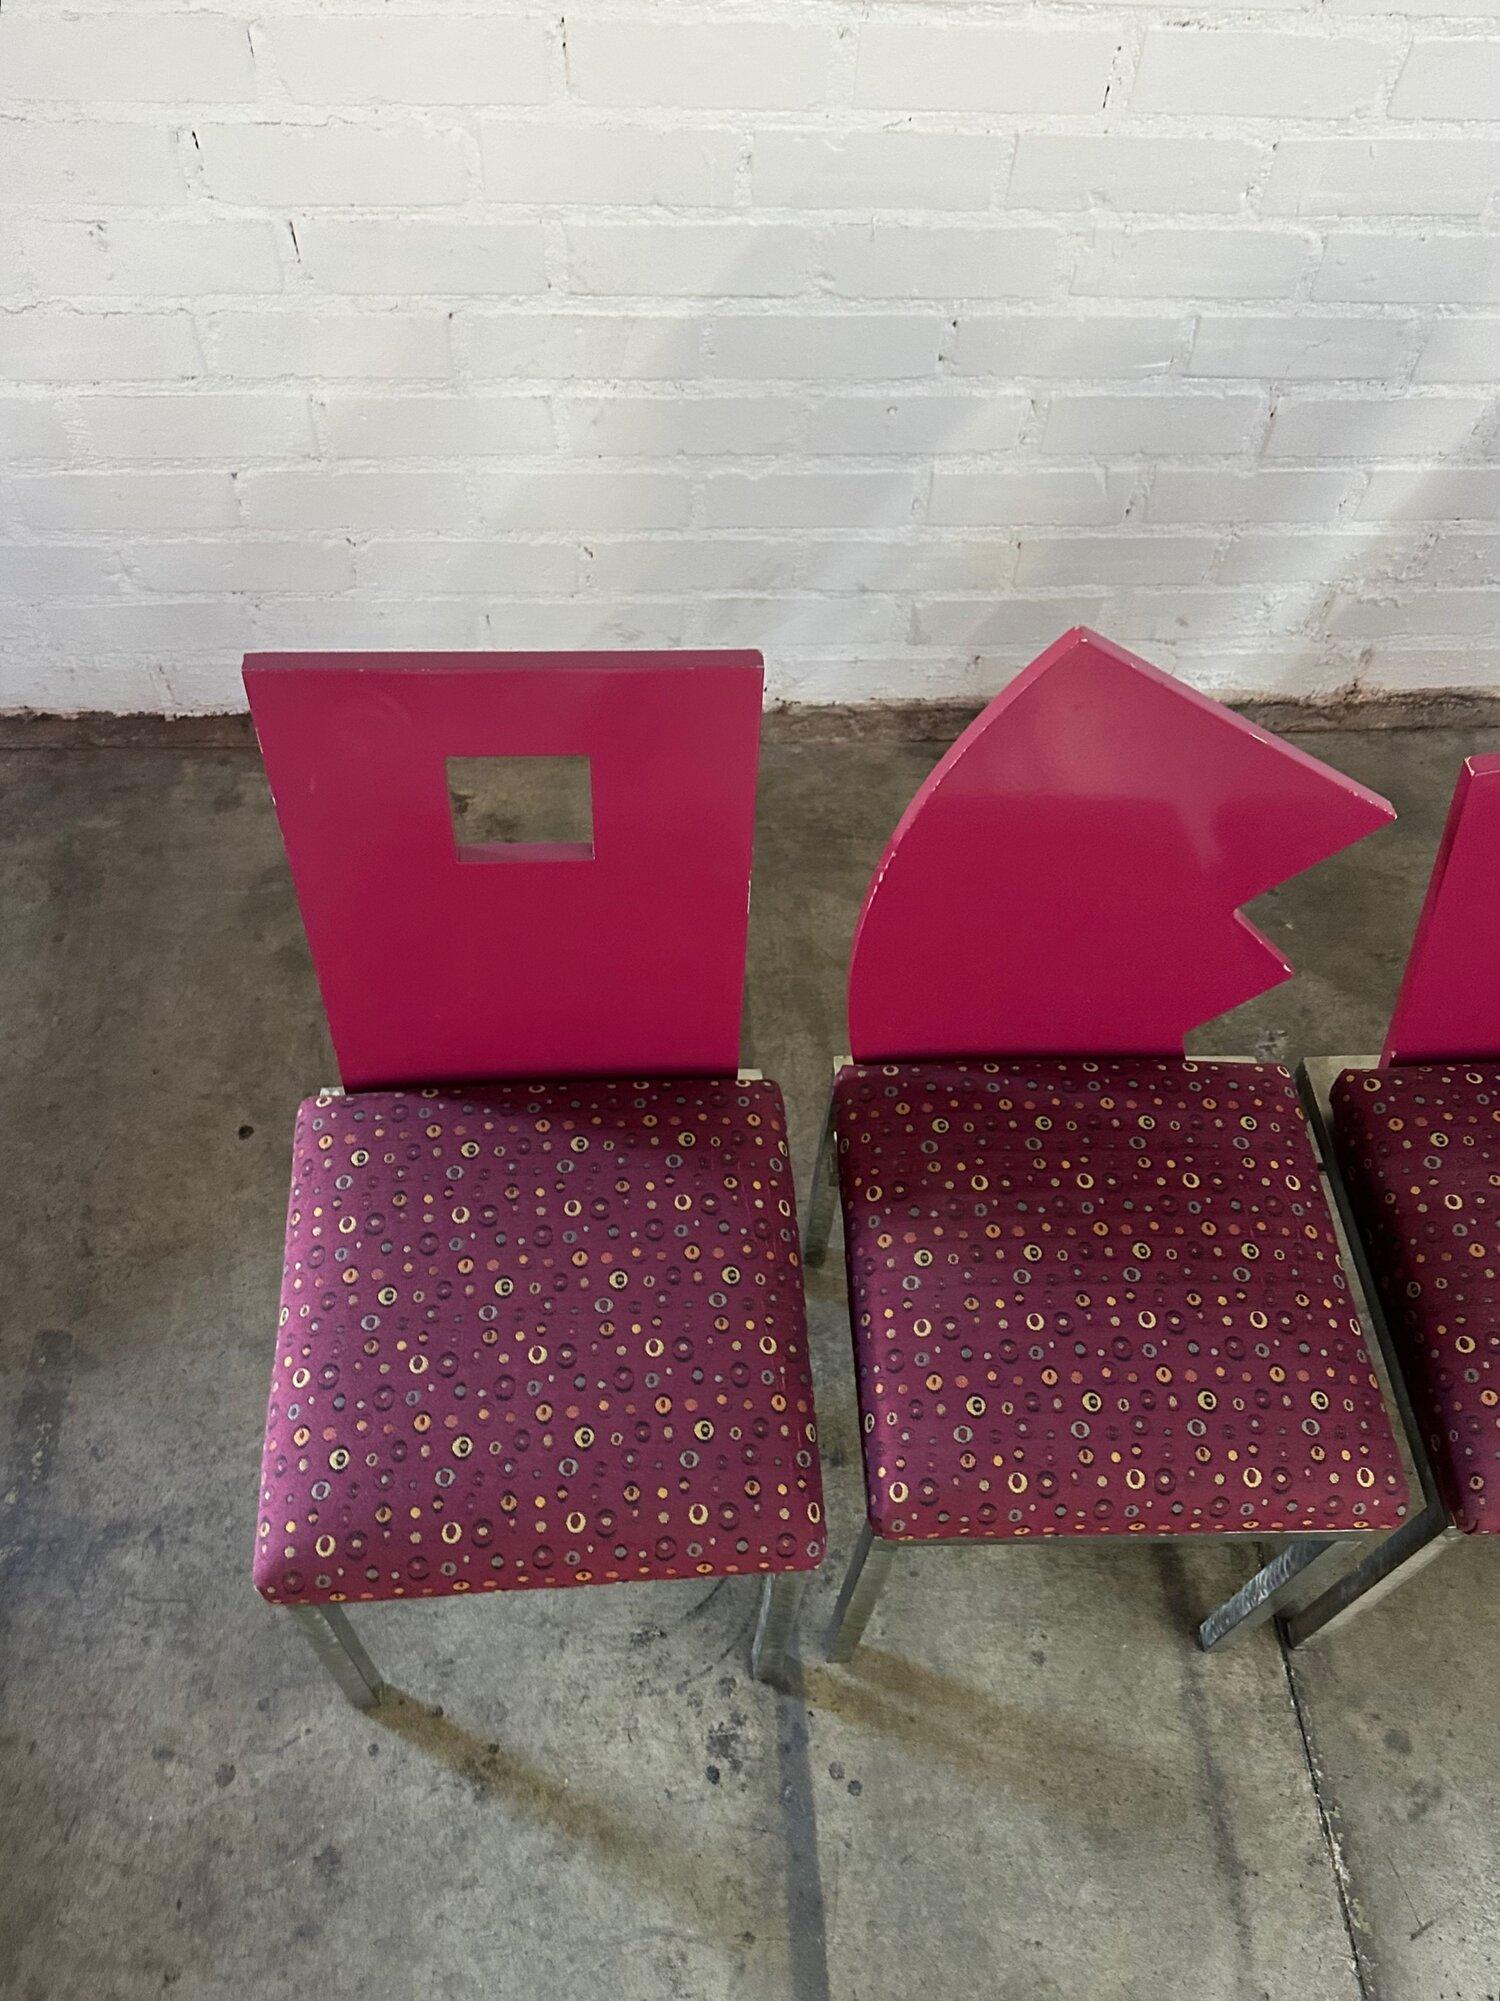 W17 D18 H36 SW15.5 SD16 SH18.5

Post Modern Dining Chairs in the the style of Saporiti. Each chair features a different shape back in a lacquered dark magenta, with a magenta patterned upholstered seat. Chair frames are made out of sturdy metal.